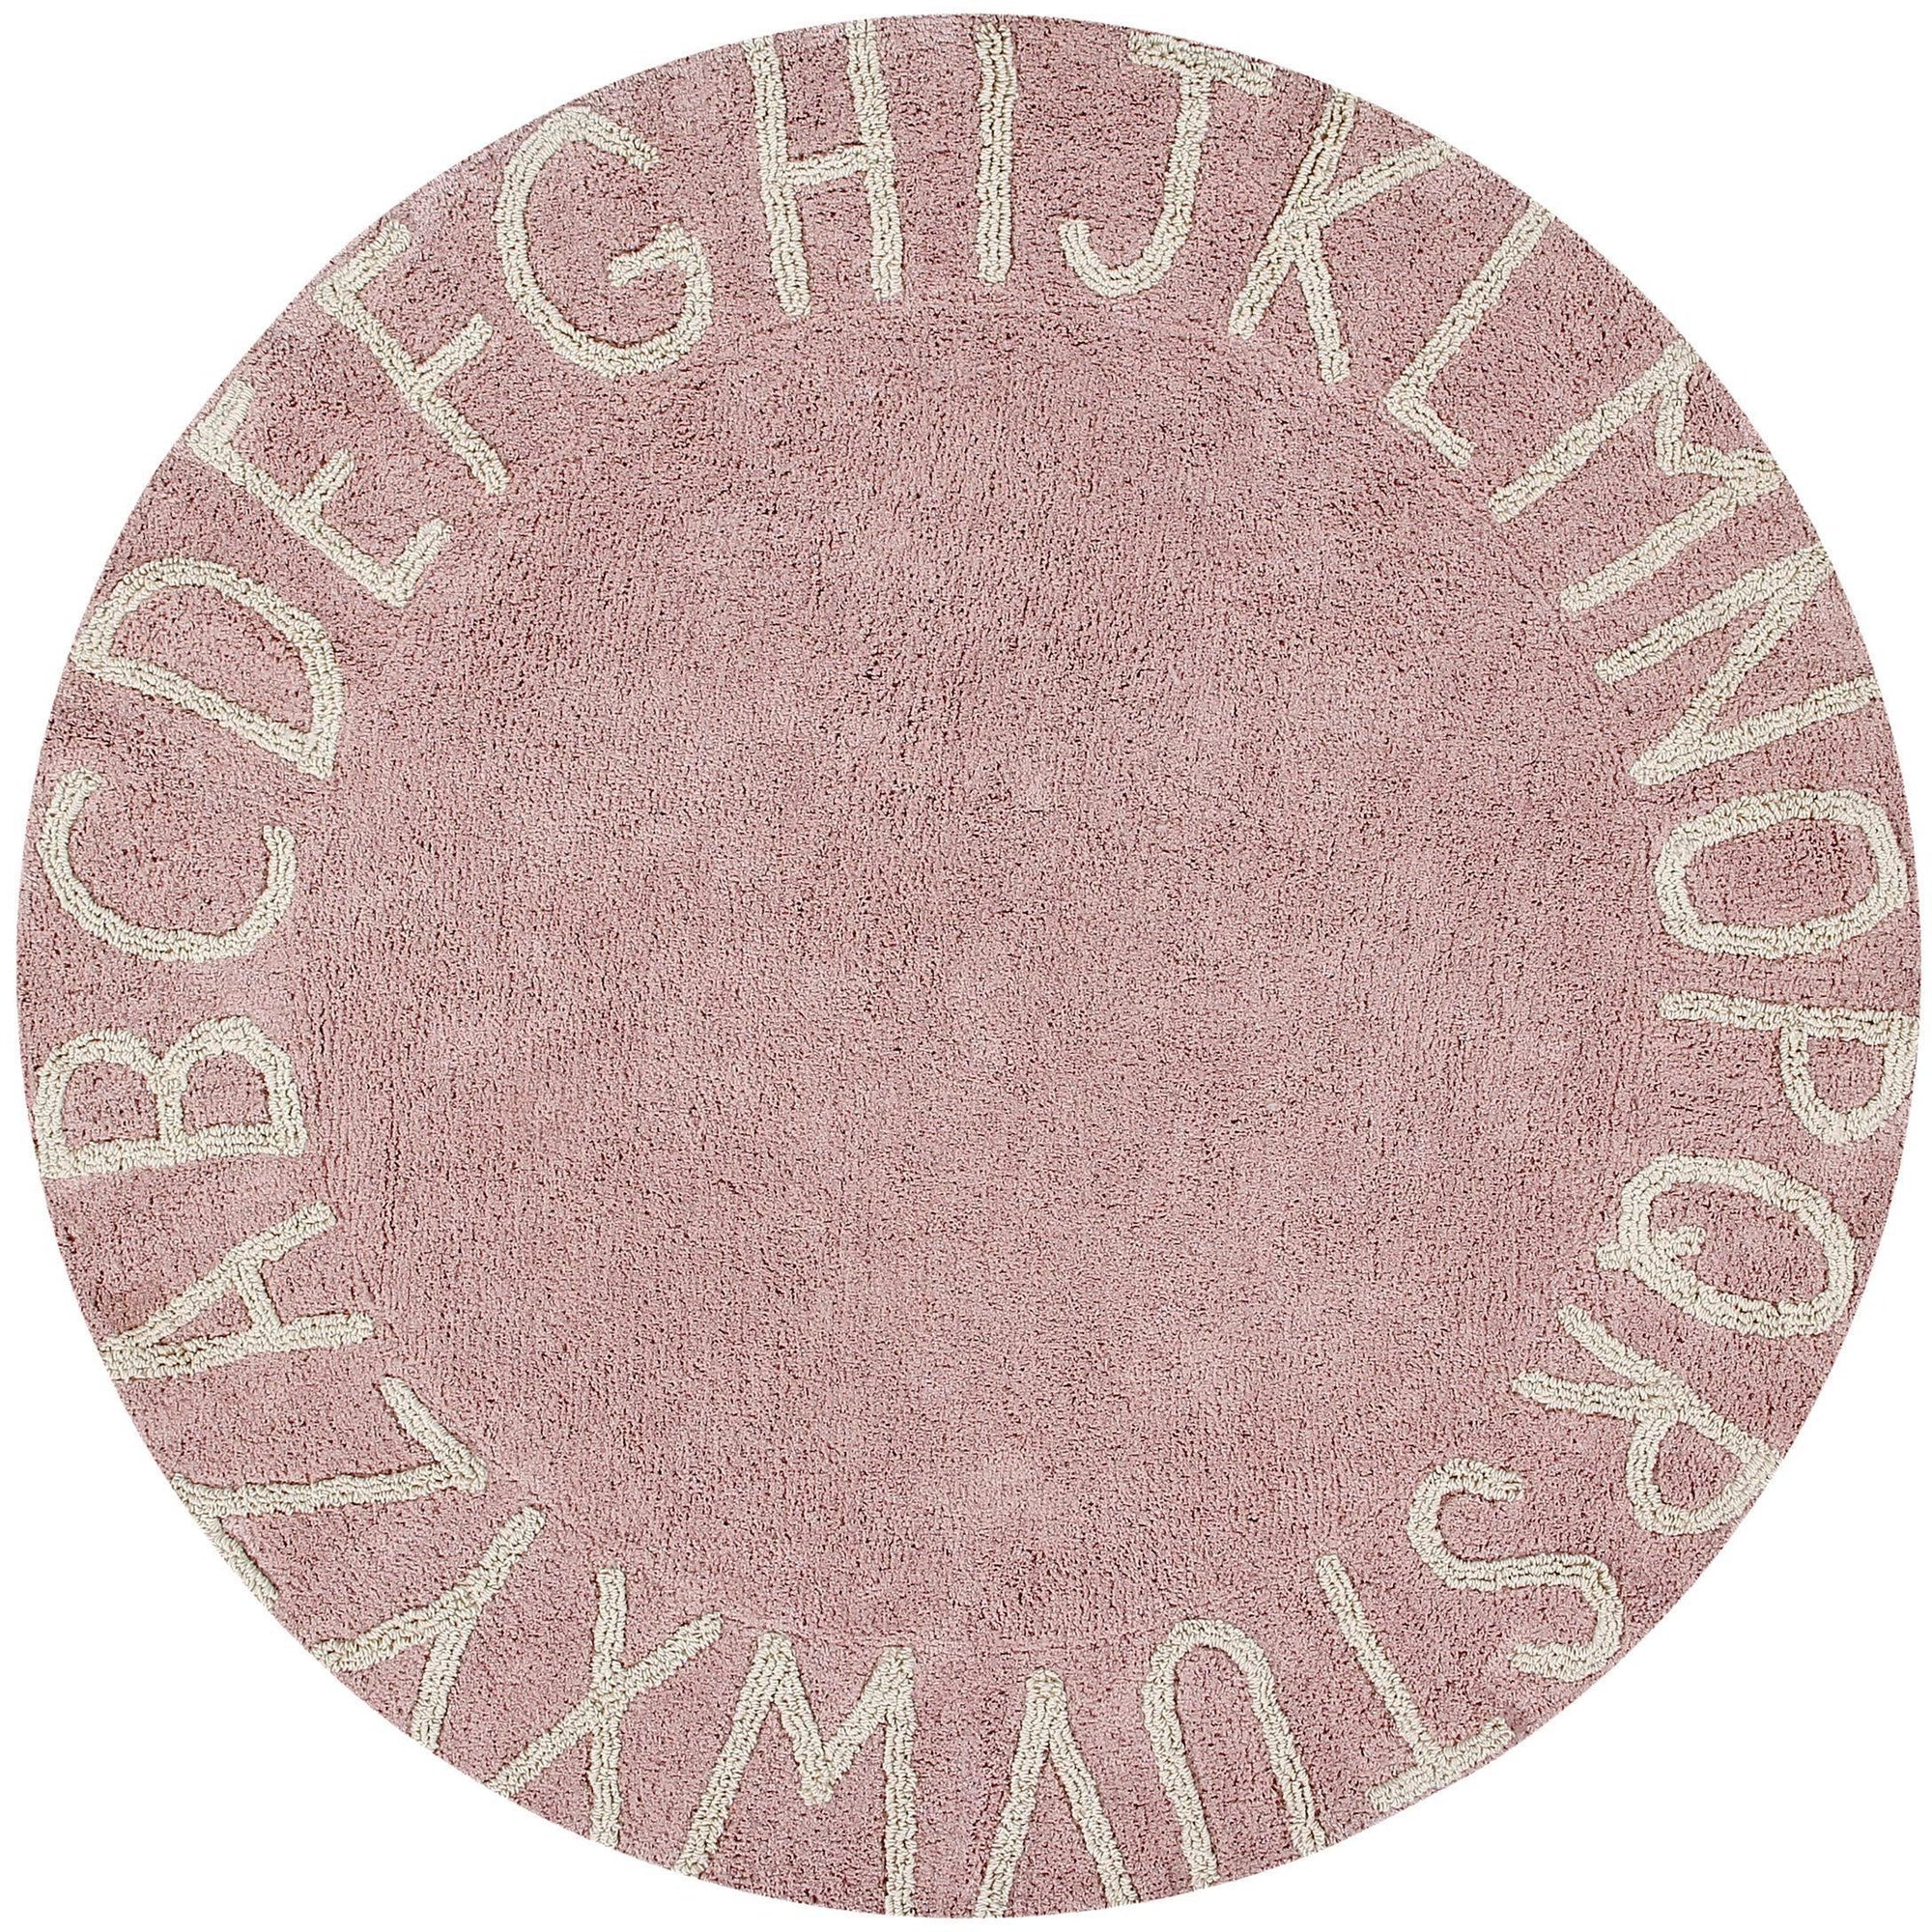 Rugs by Roo | Lorena Canals Round ABC Vintage Nude Natural Machine Washable Kids Area Rug-C-ABC-VNN